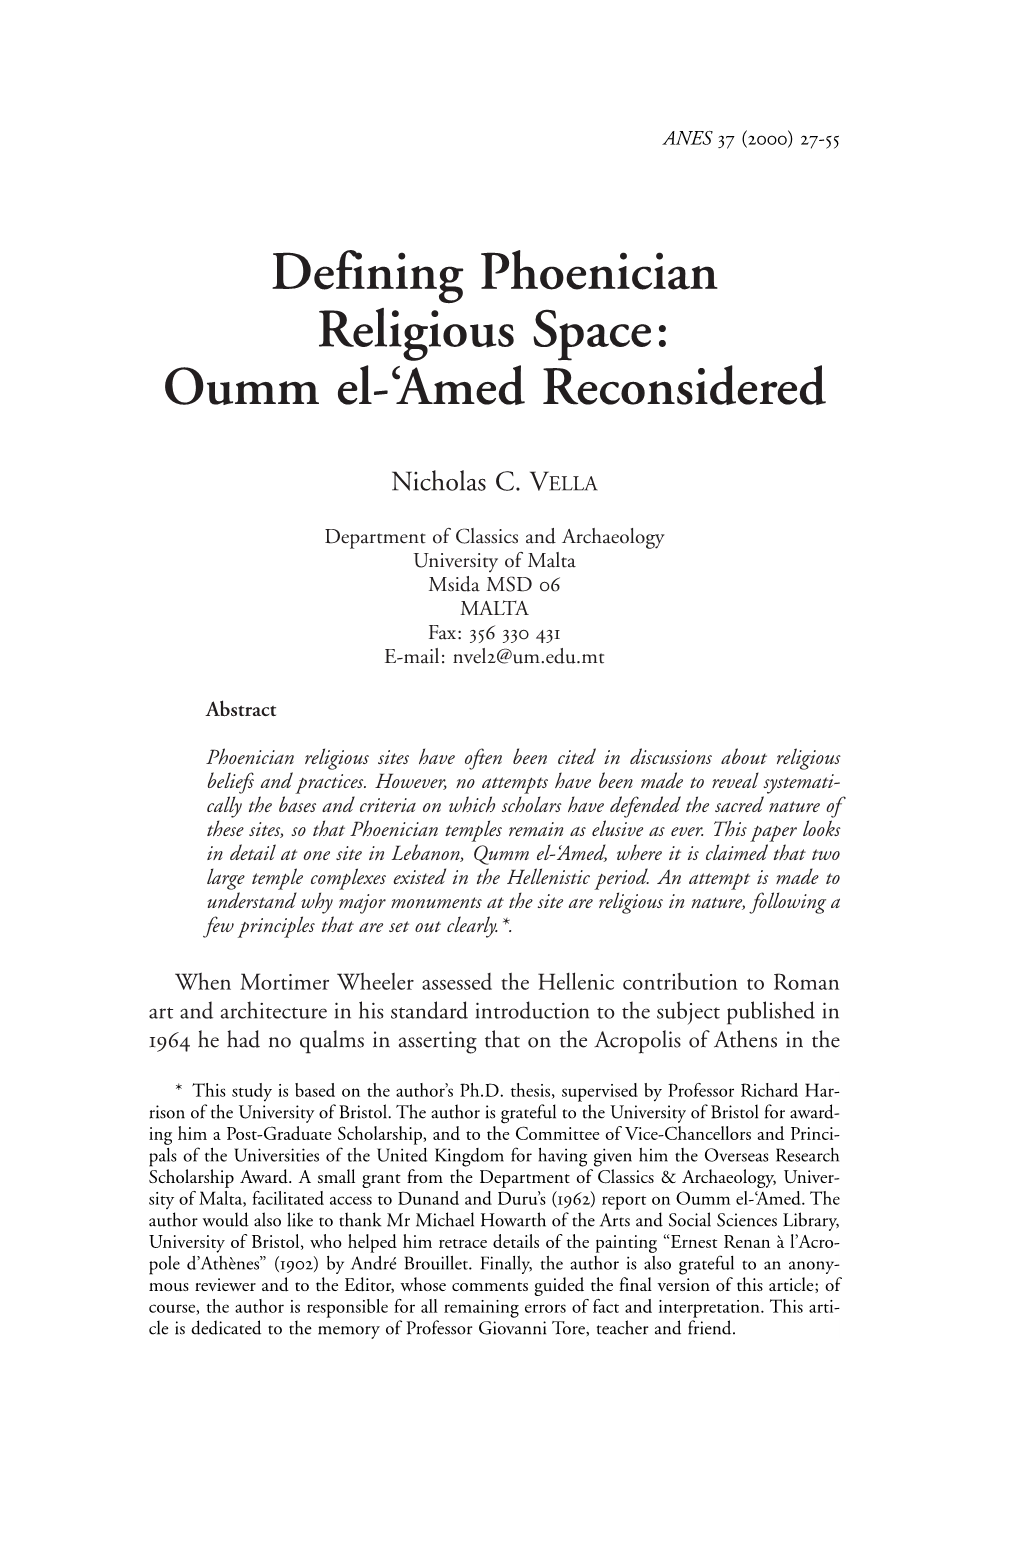 Defining Phoenician Religious Space: Oumm El-'Amed